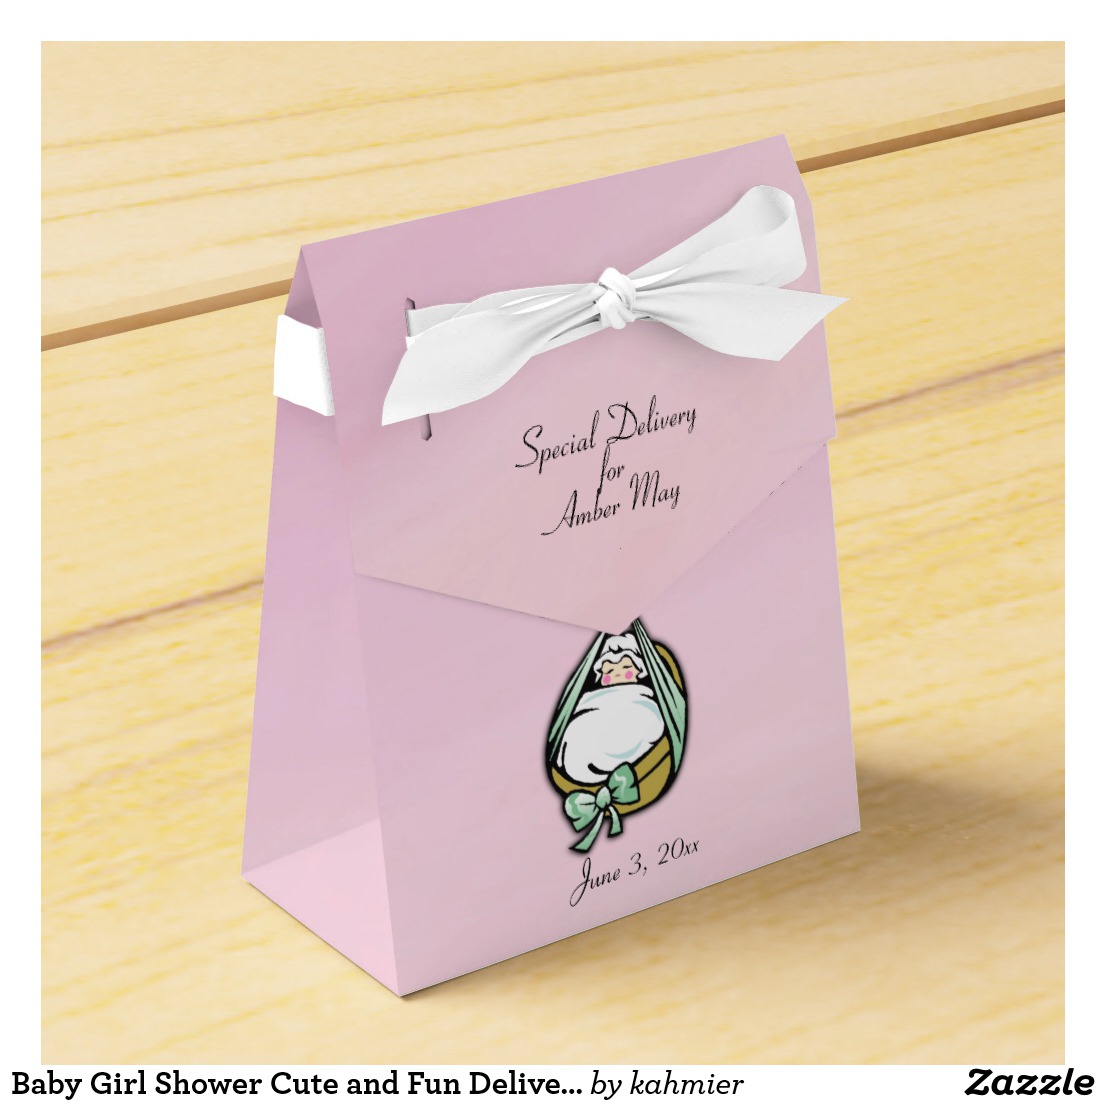 Baby Girl Shower Cute and Fun Delivery Stork Favor Box